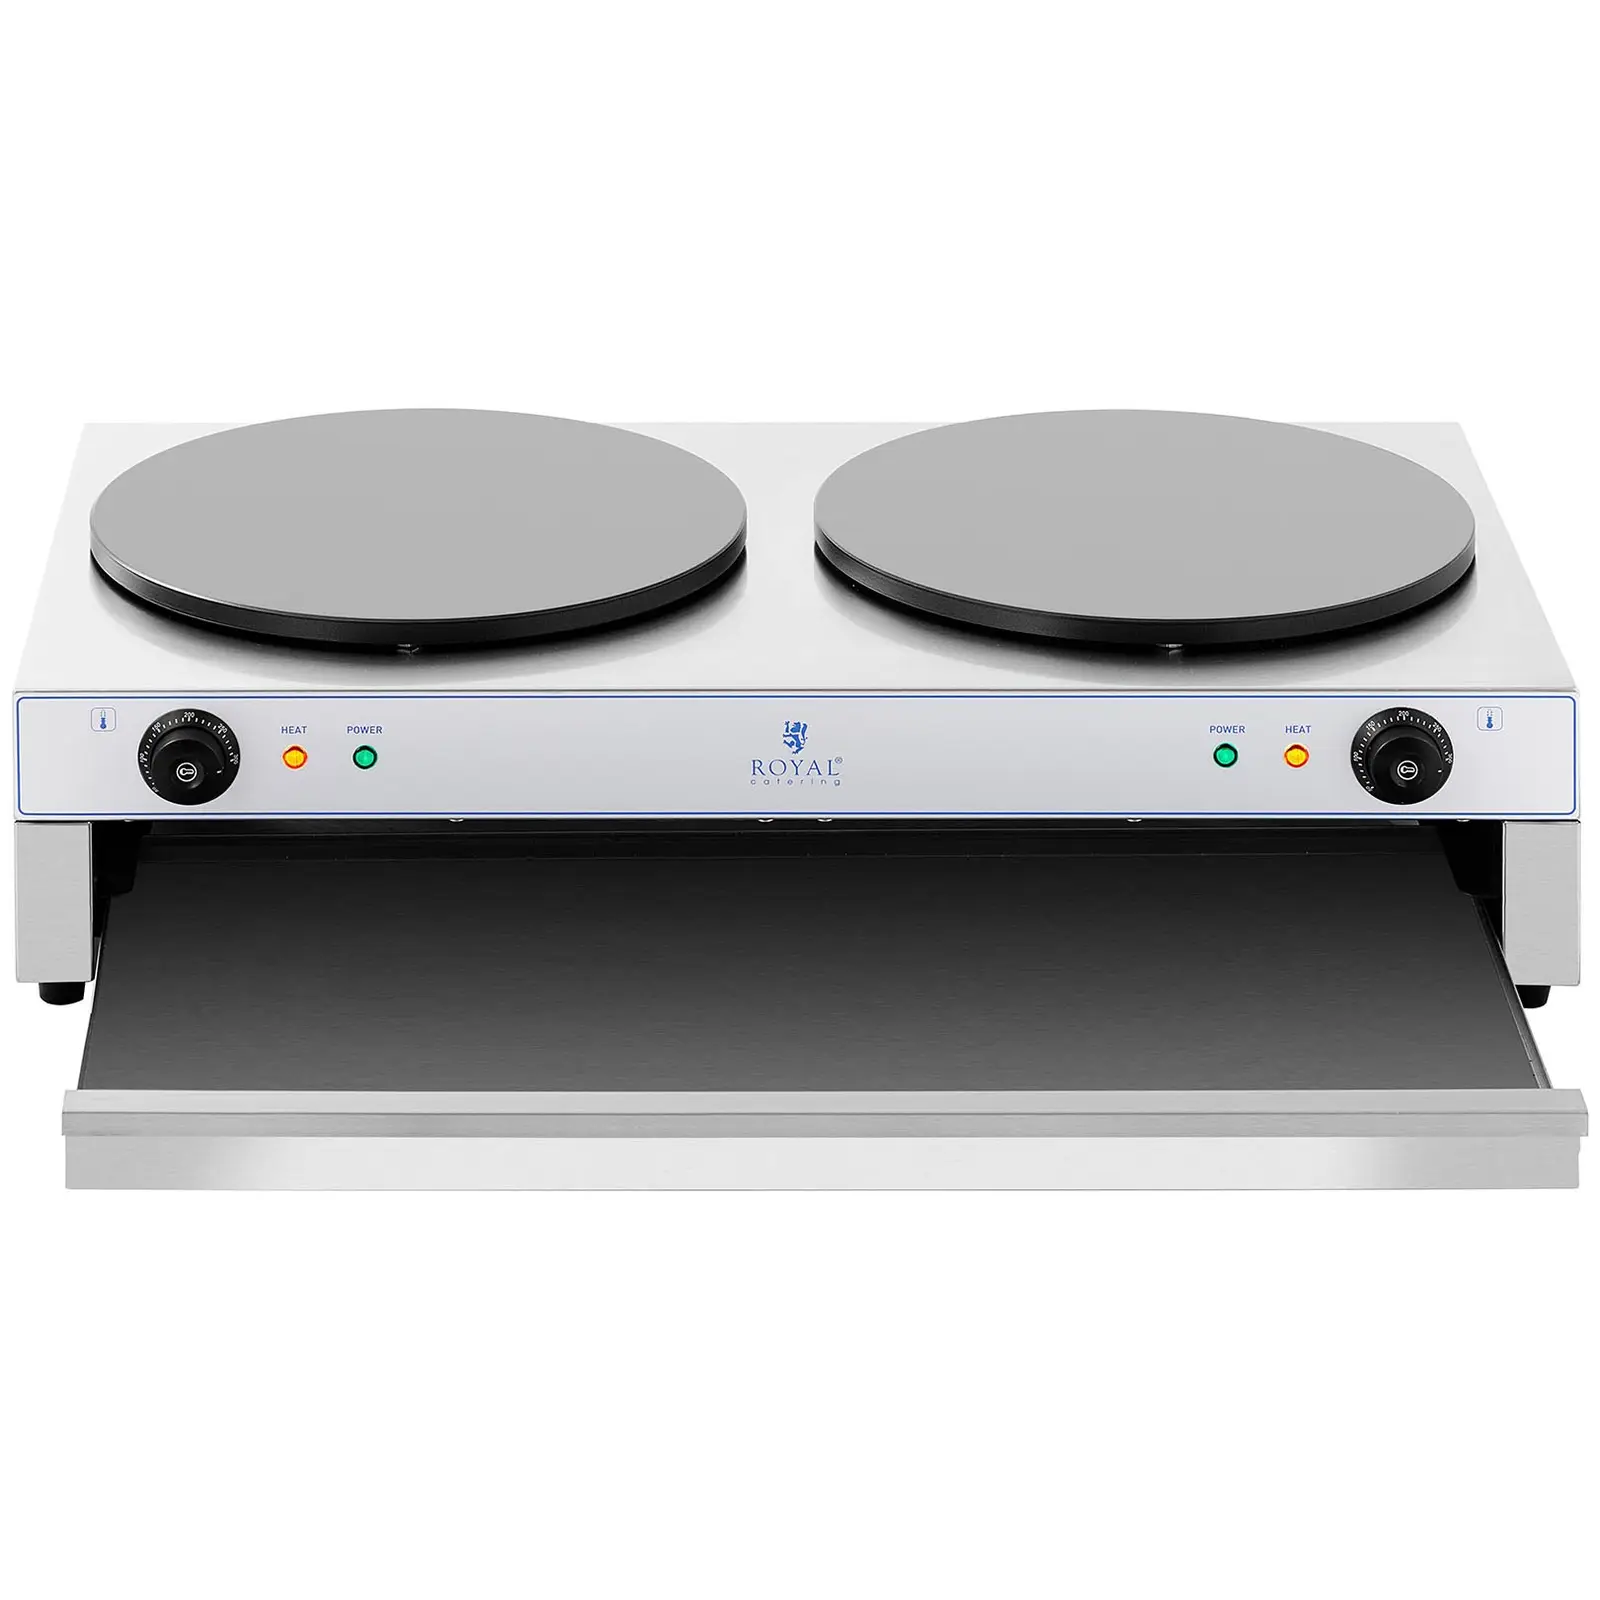 Crepera - 2 x Ø 400 mm - Royal Catering - 2 x 3,000 W - compartimento extraíble